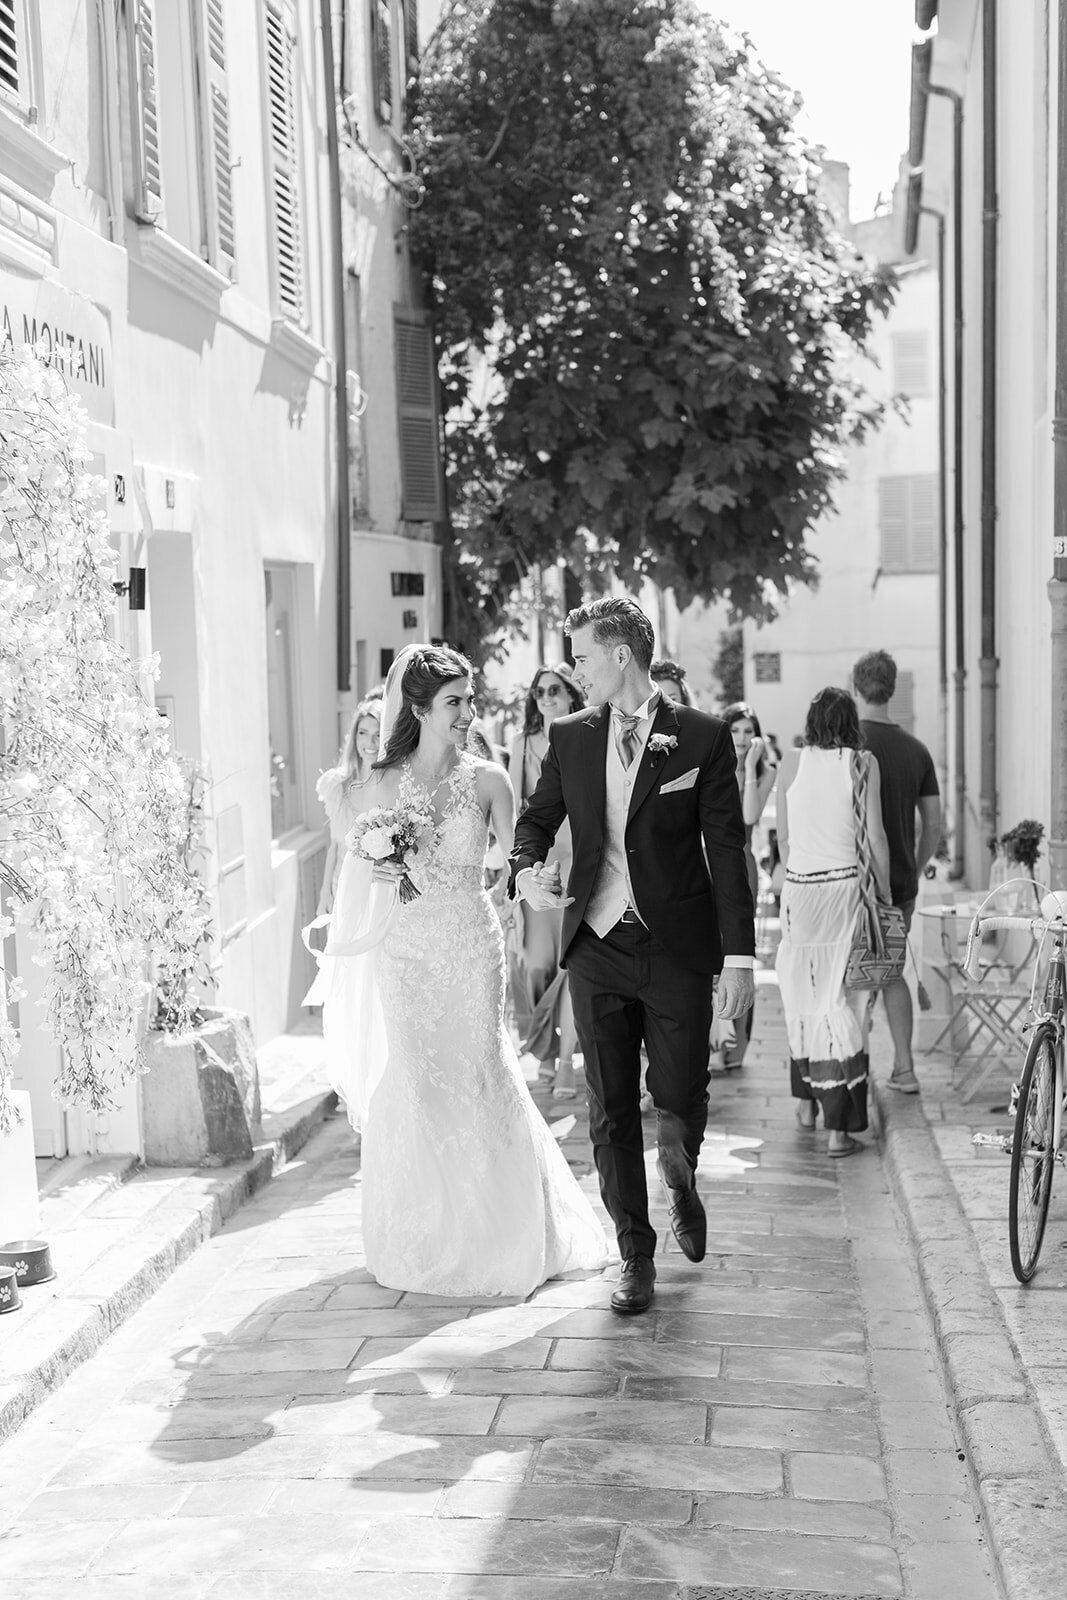 st-tropez-wedding-luxury-photographer-french-rivieira-south-of-france-12